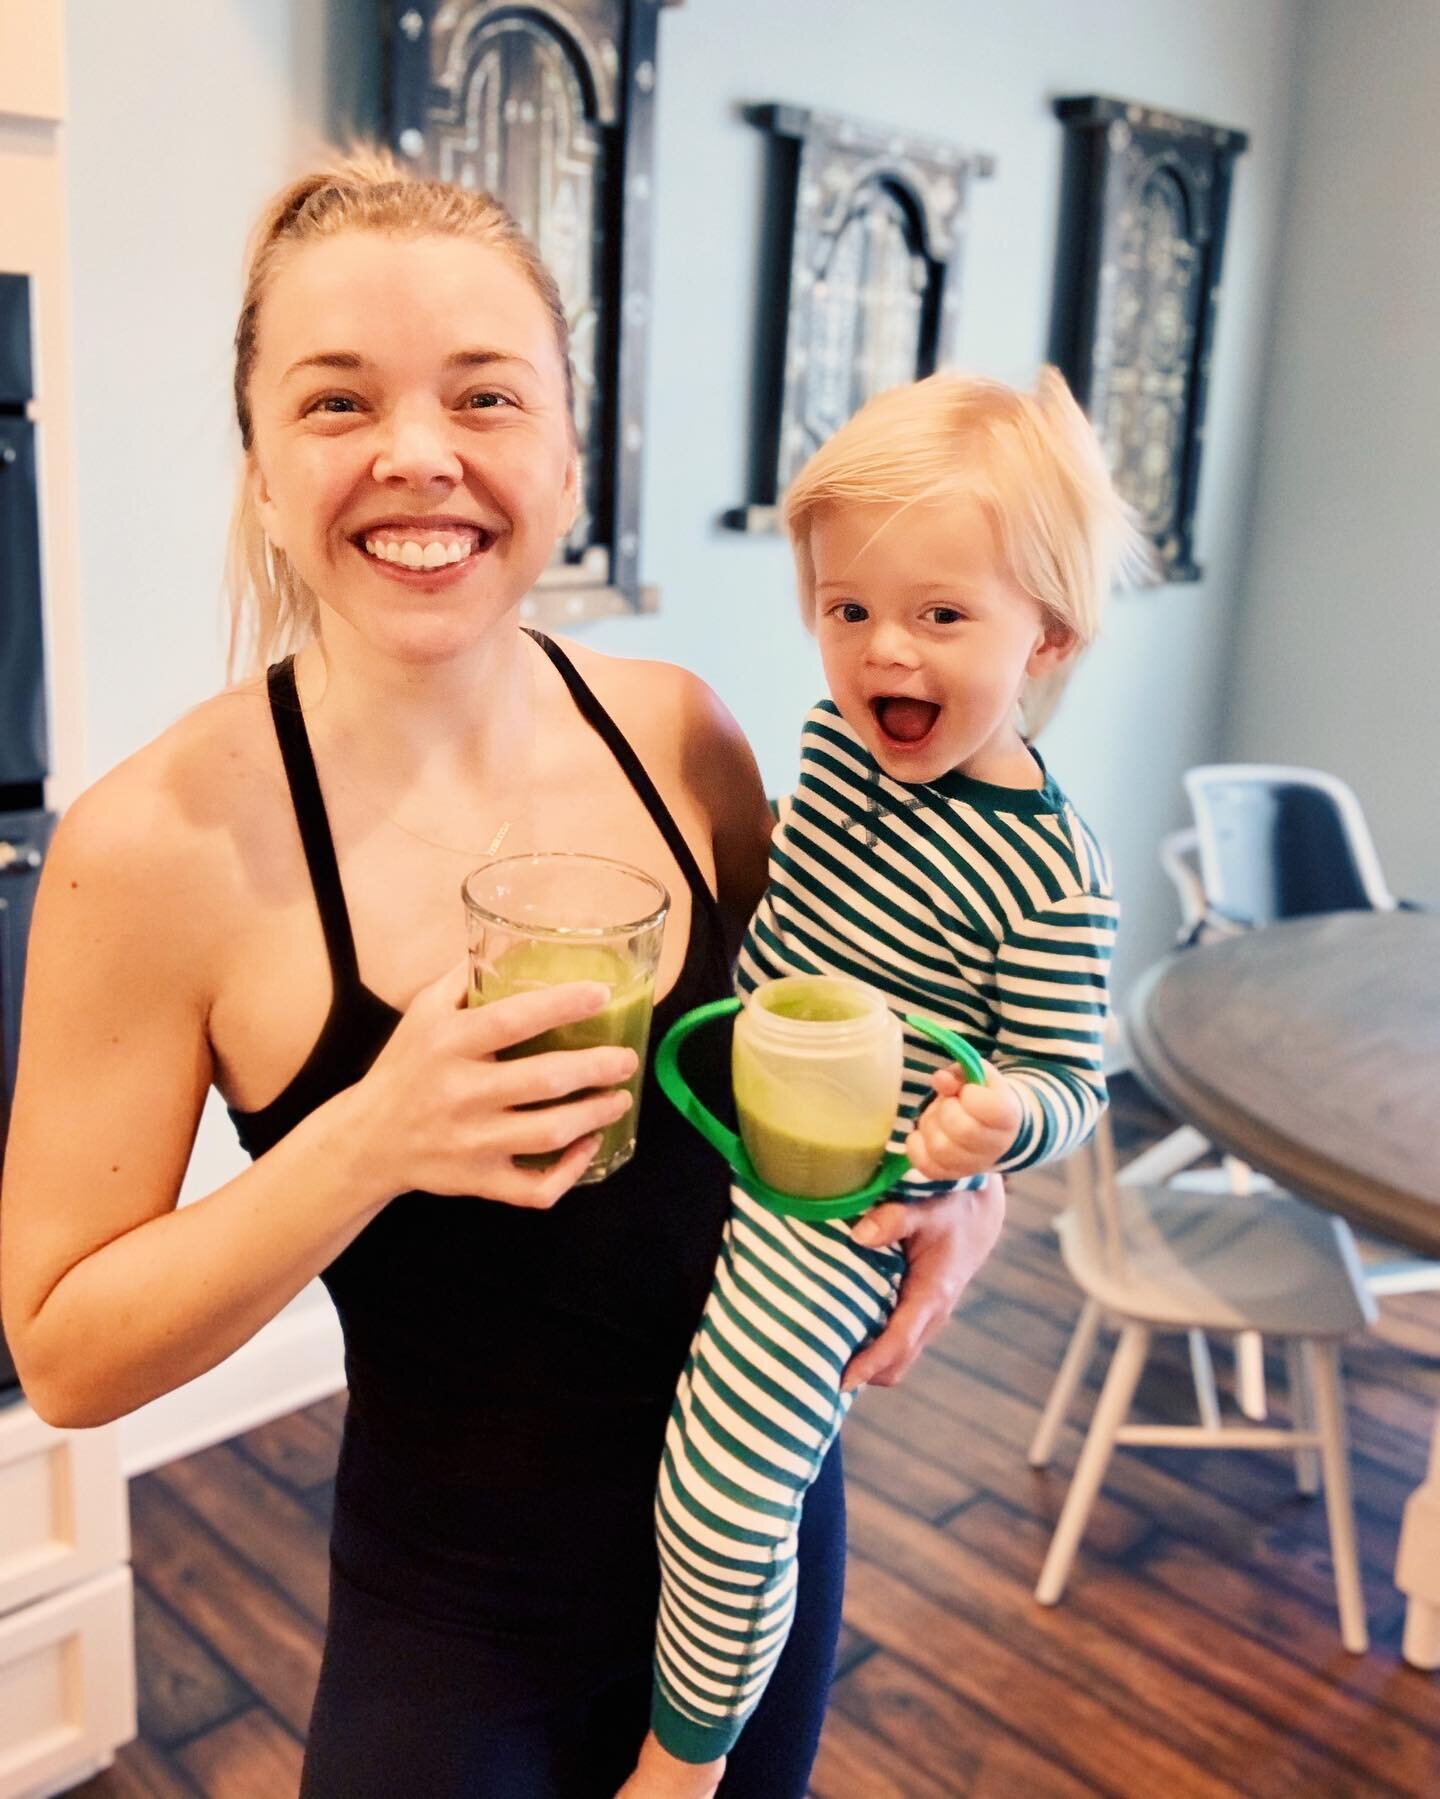 When the greens kick in from your smoothie ⚡️🌱 yay, baby it&rsquo;s Friday!! But seriously, Bryson is all about a green smoothie- we call this one &ldquo;Extreme Greens&rdquo;!
.
.
.
Blend: 

One cup loose packed kale, stems removed
Three small Roma